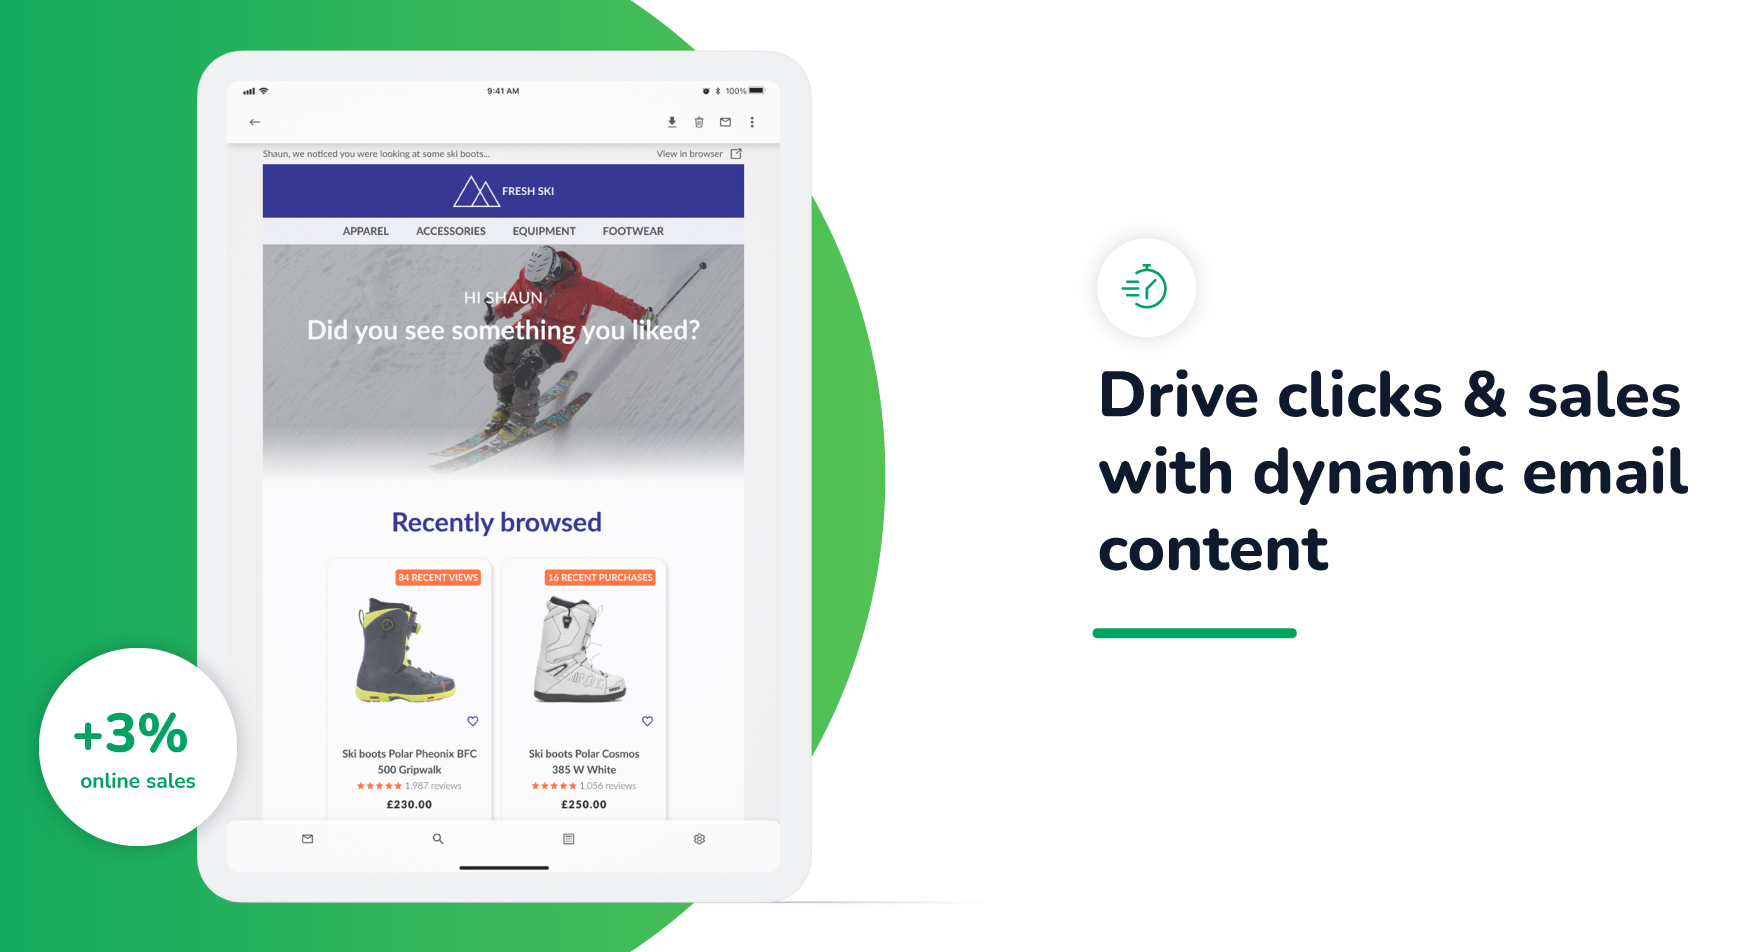 Drive clicks & sales with dynamic email content